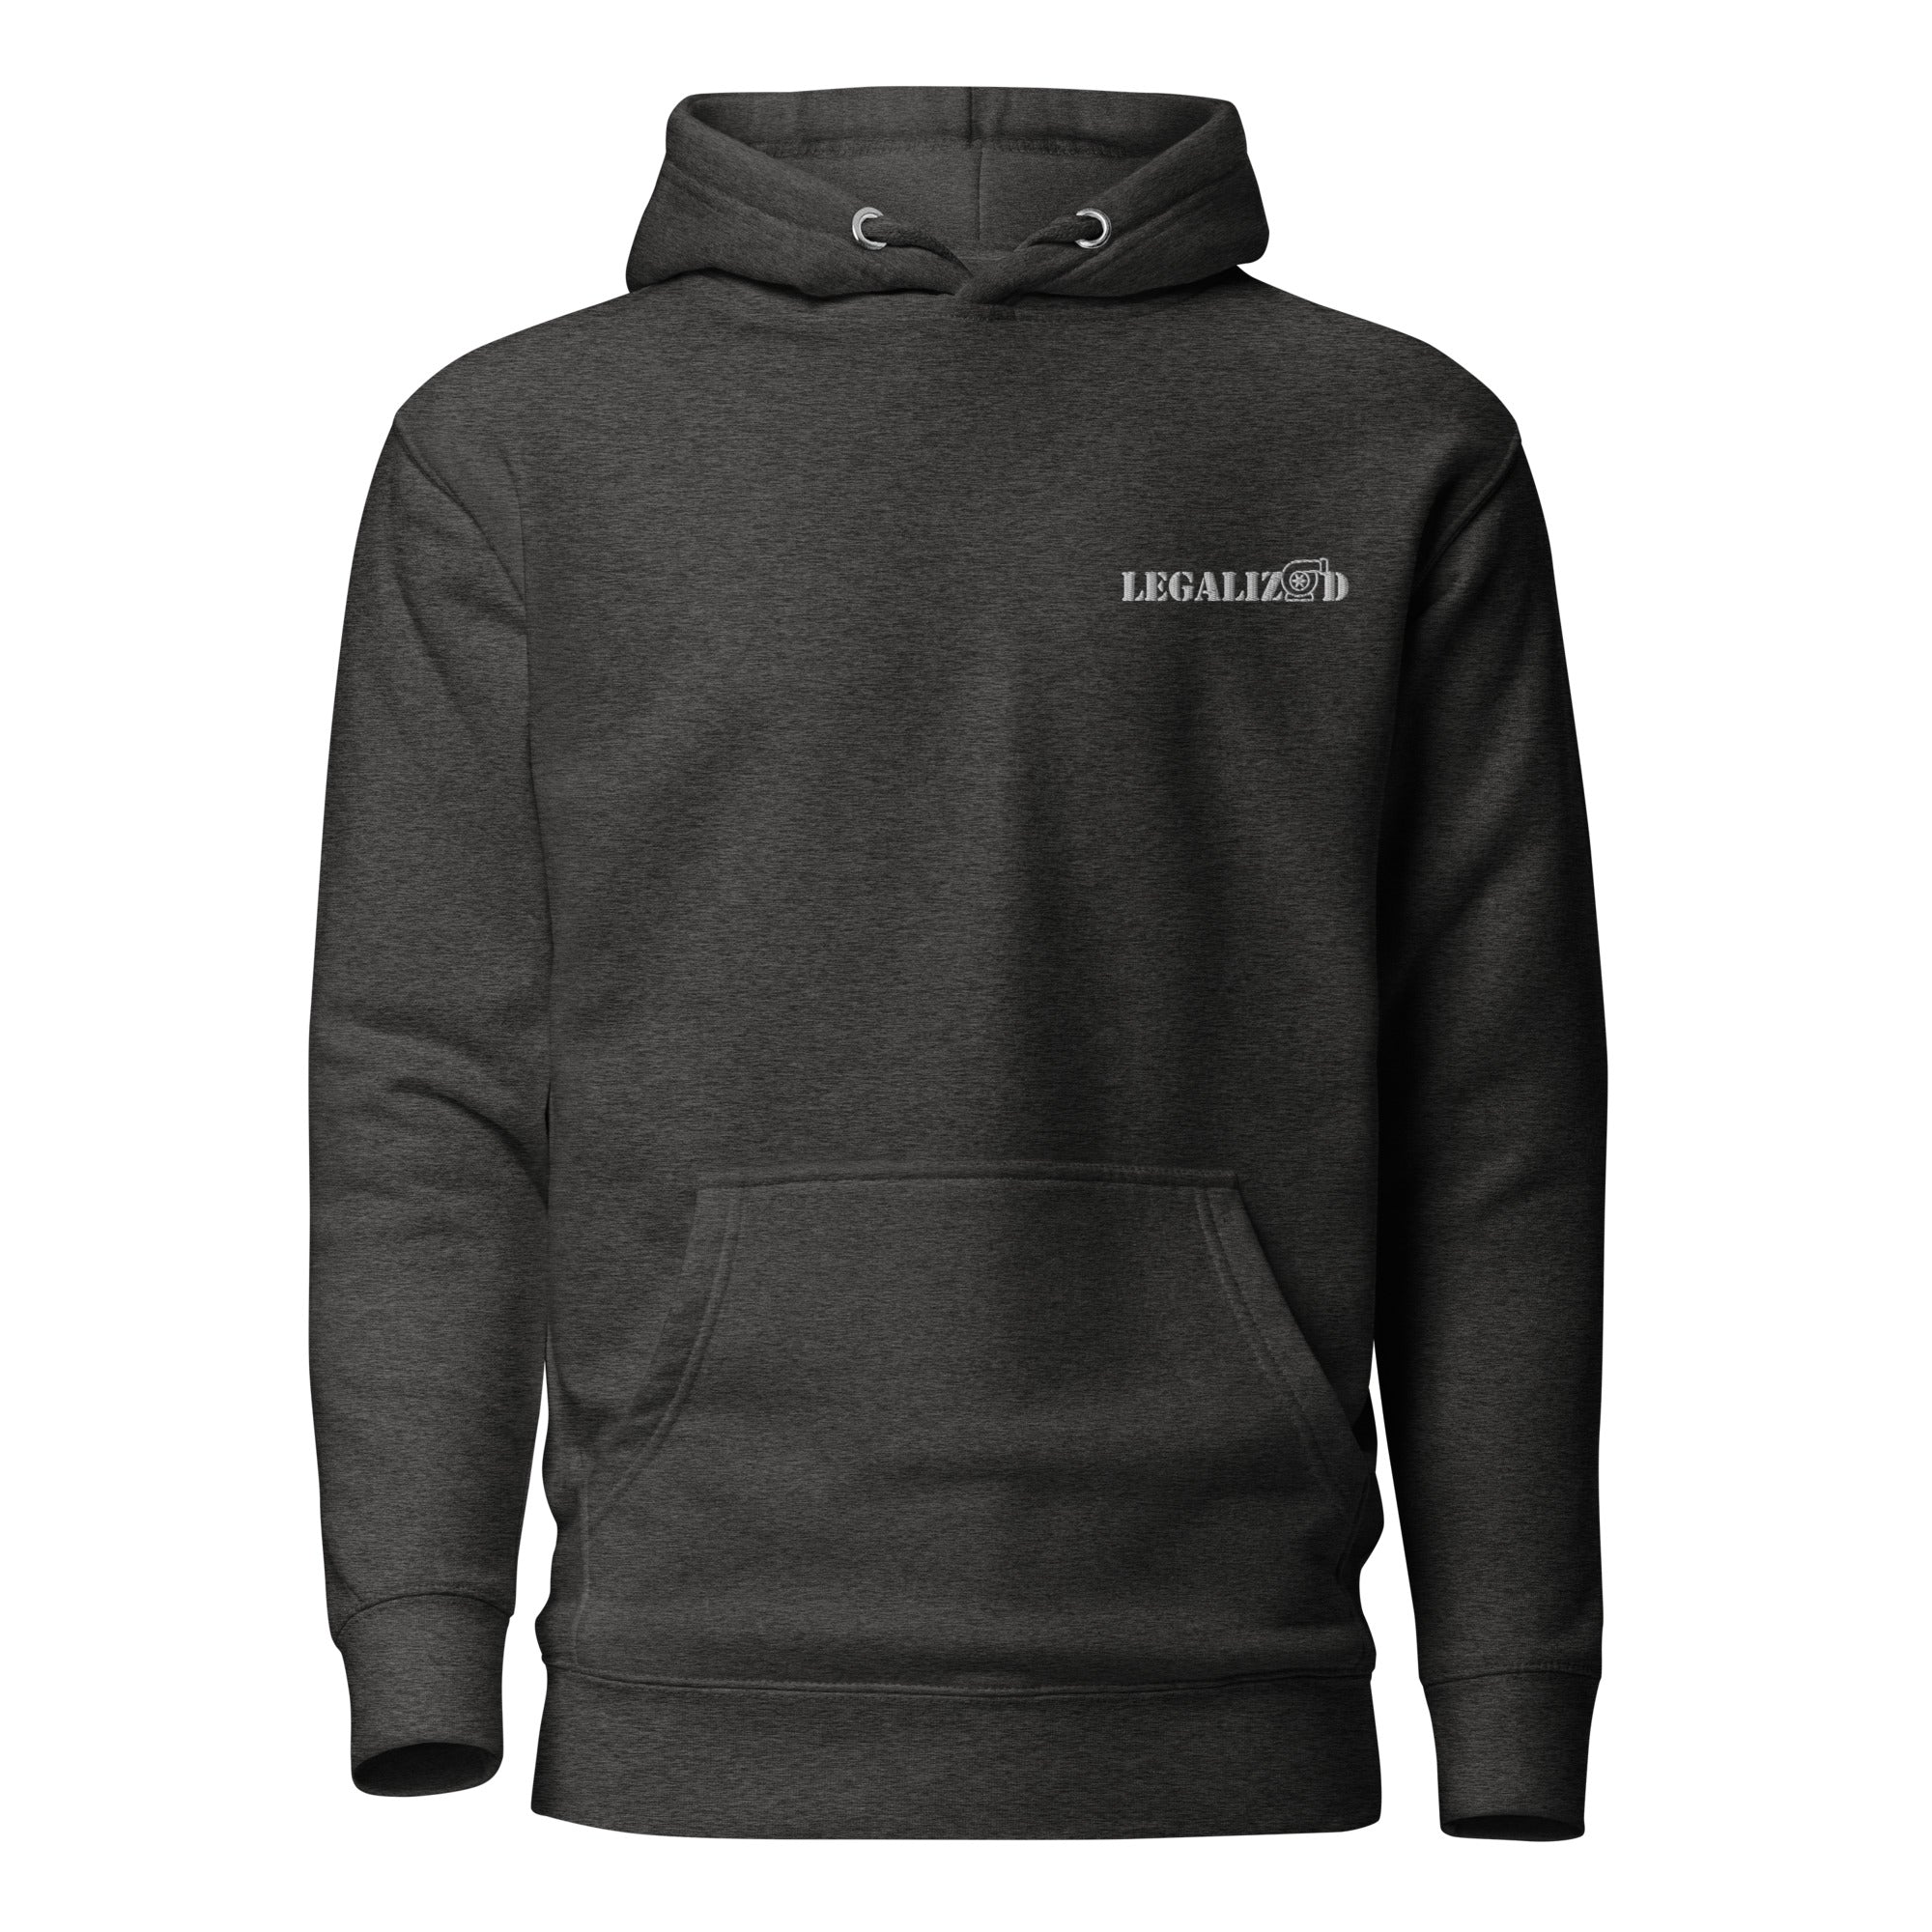 Legalized Embroidery Hoodie